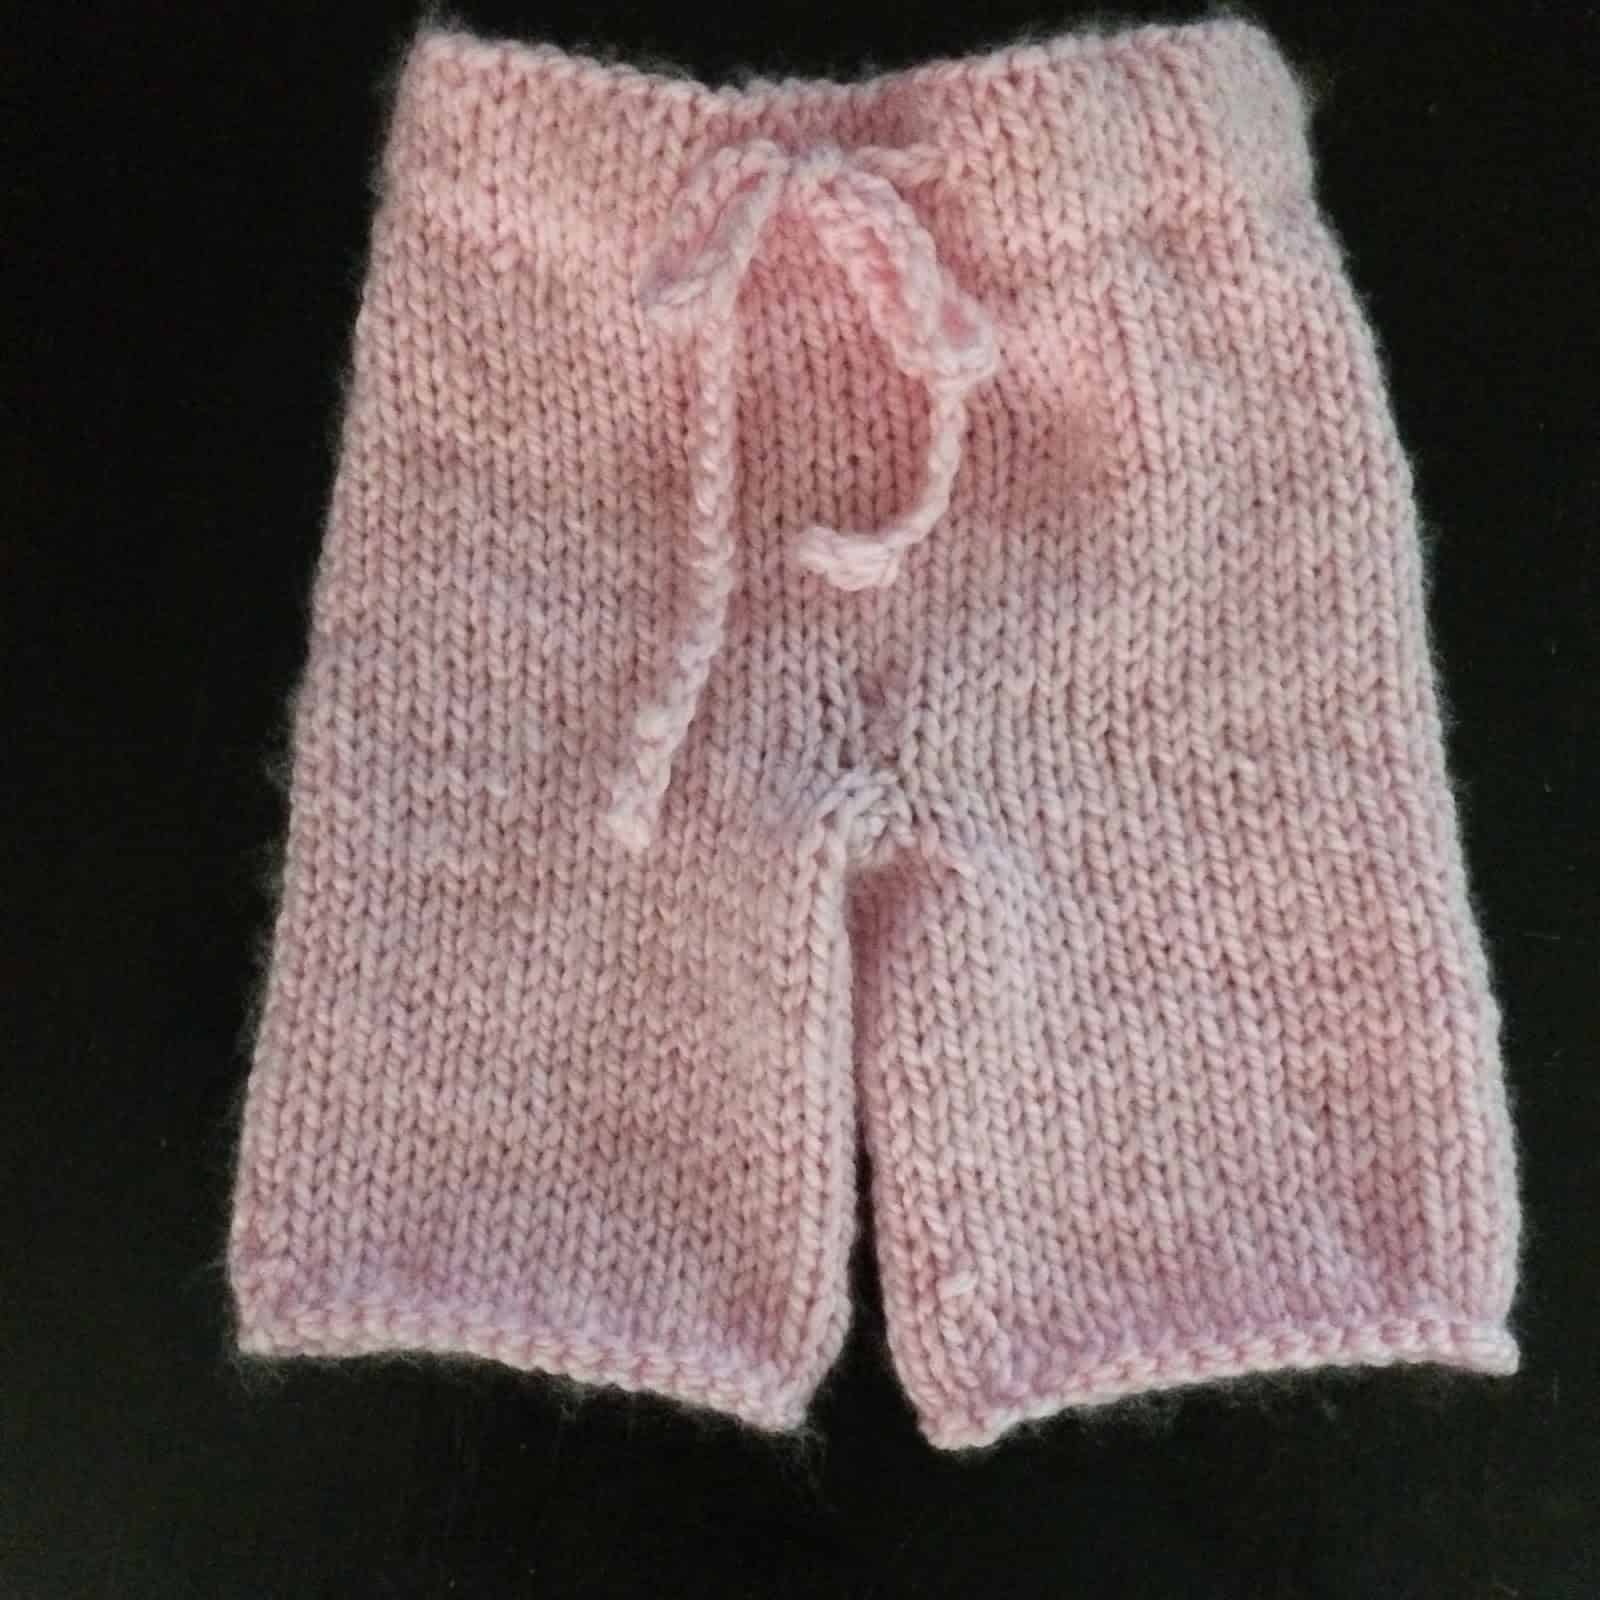 Simple knitted drawstring baby pants